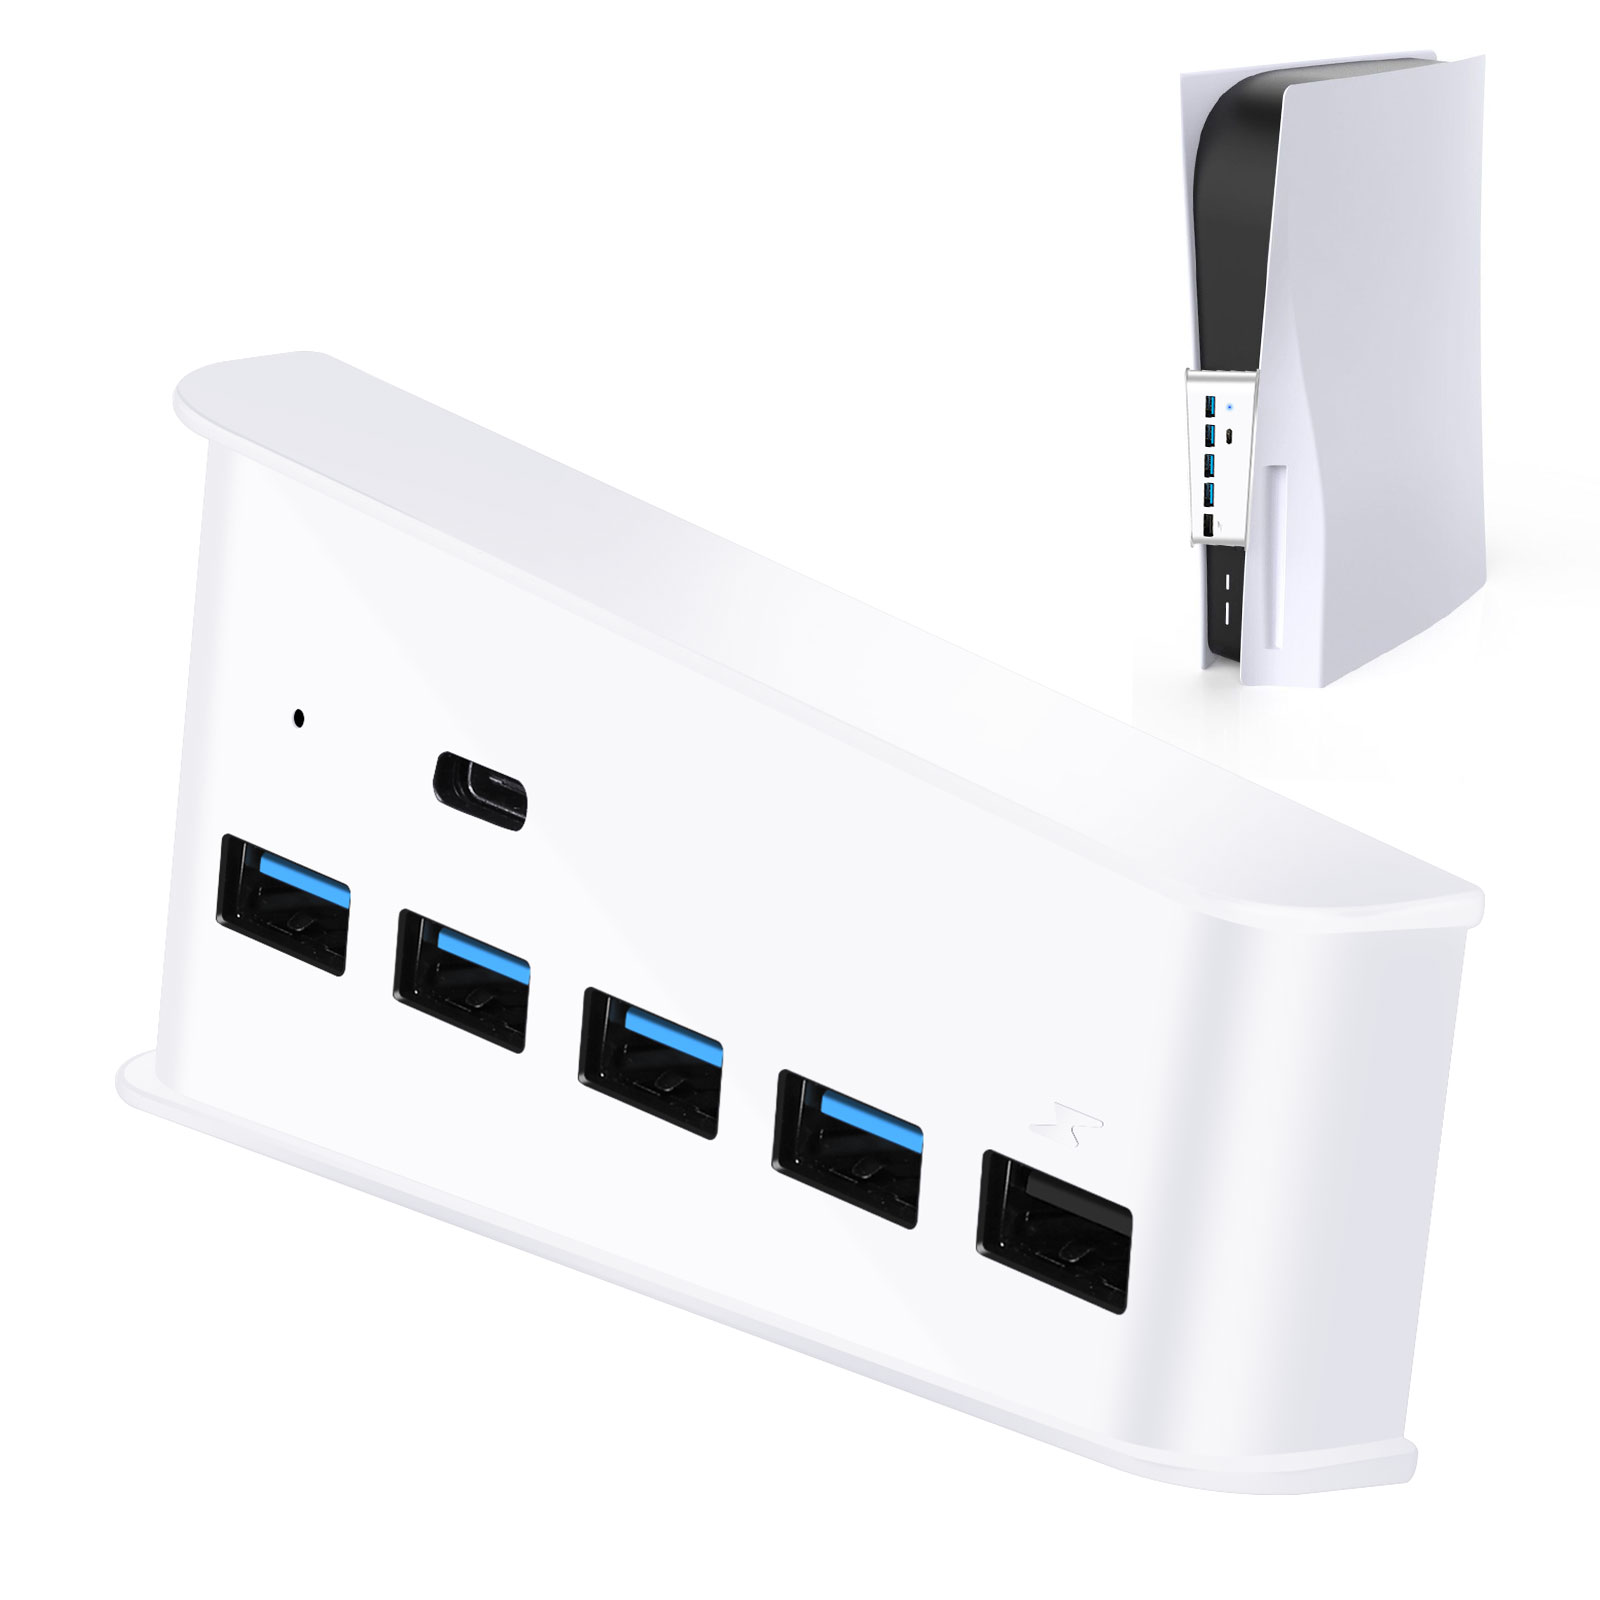 5 Port USB Hub for PS5, Megadream High-Speed Expansion Hub Charger Splitter  Adapter with 4 USB + 1 USB Charging Port + 1 Type C Port, Compatible with